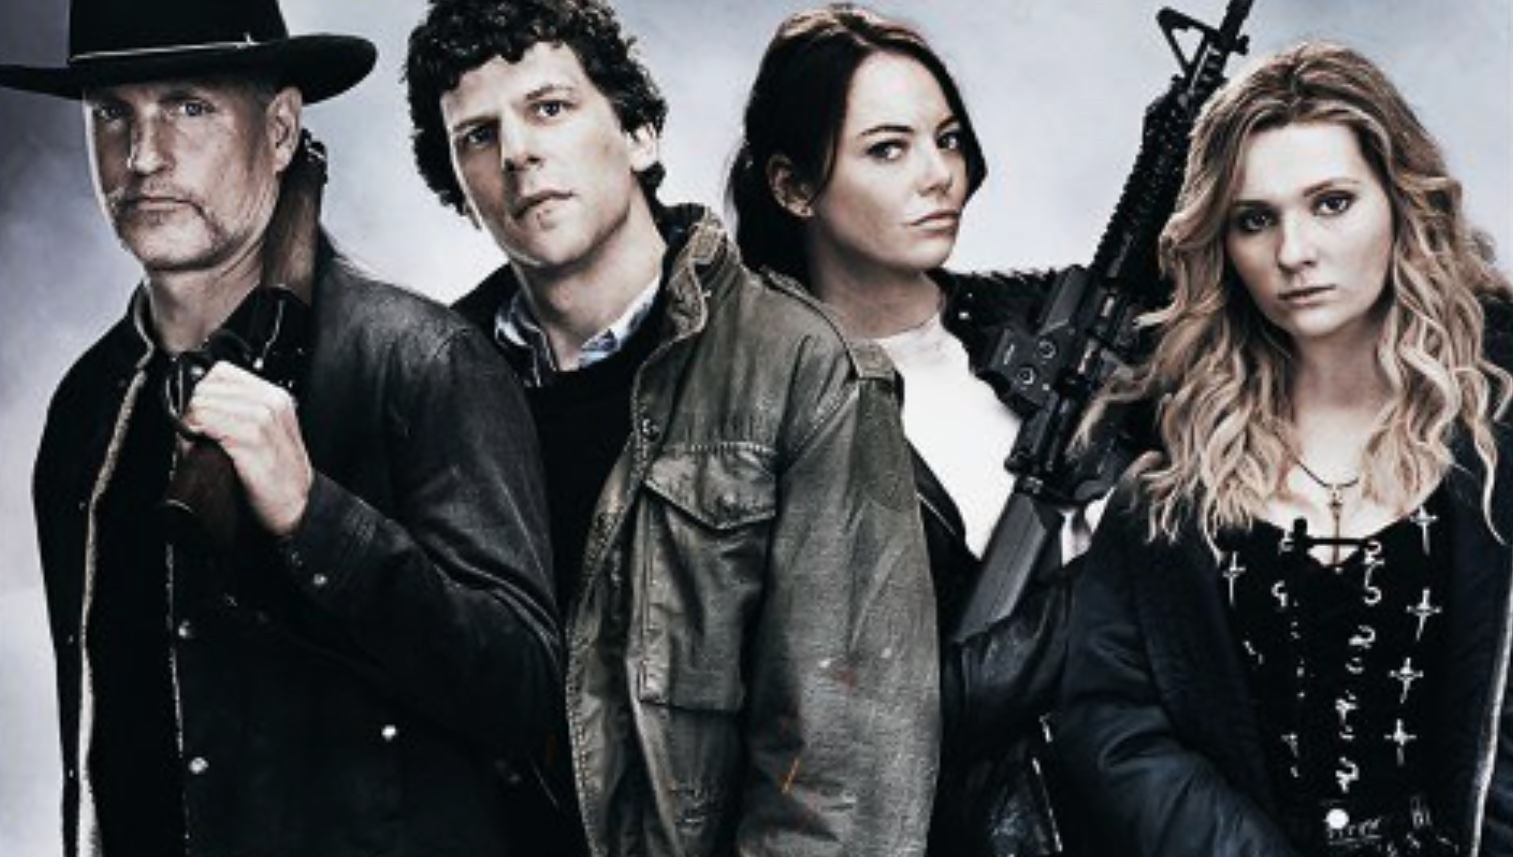 Zombieland: Double Tap (@zombieland) • Instagram photos and videos